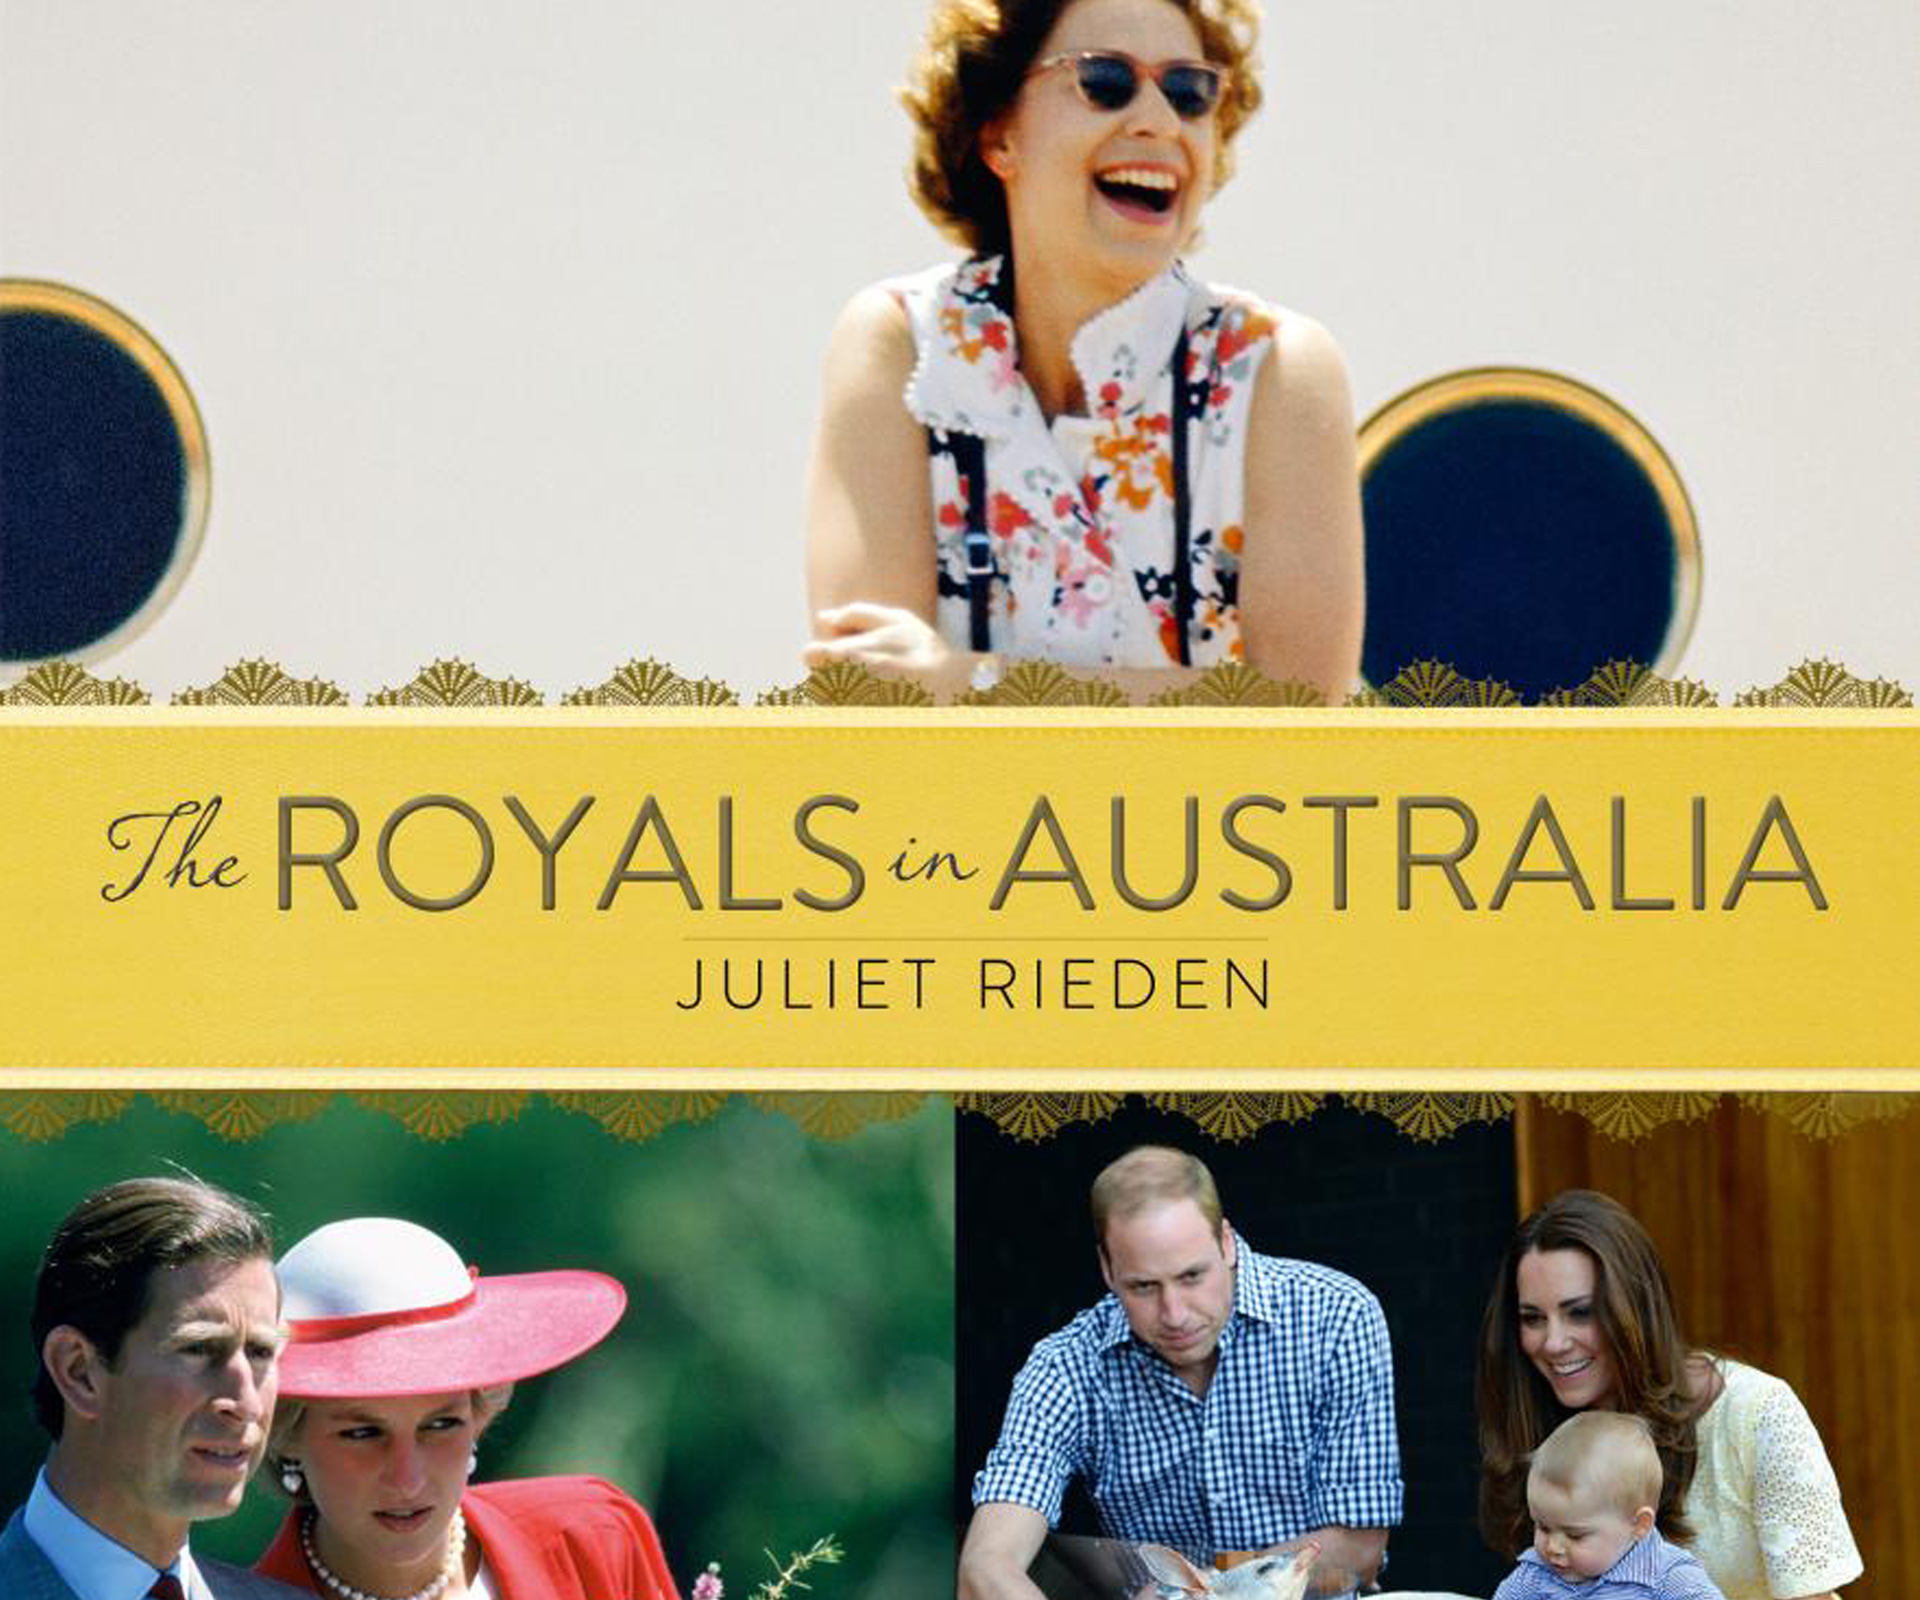 Get an insider’s look into the royal family Down Under